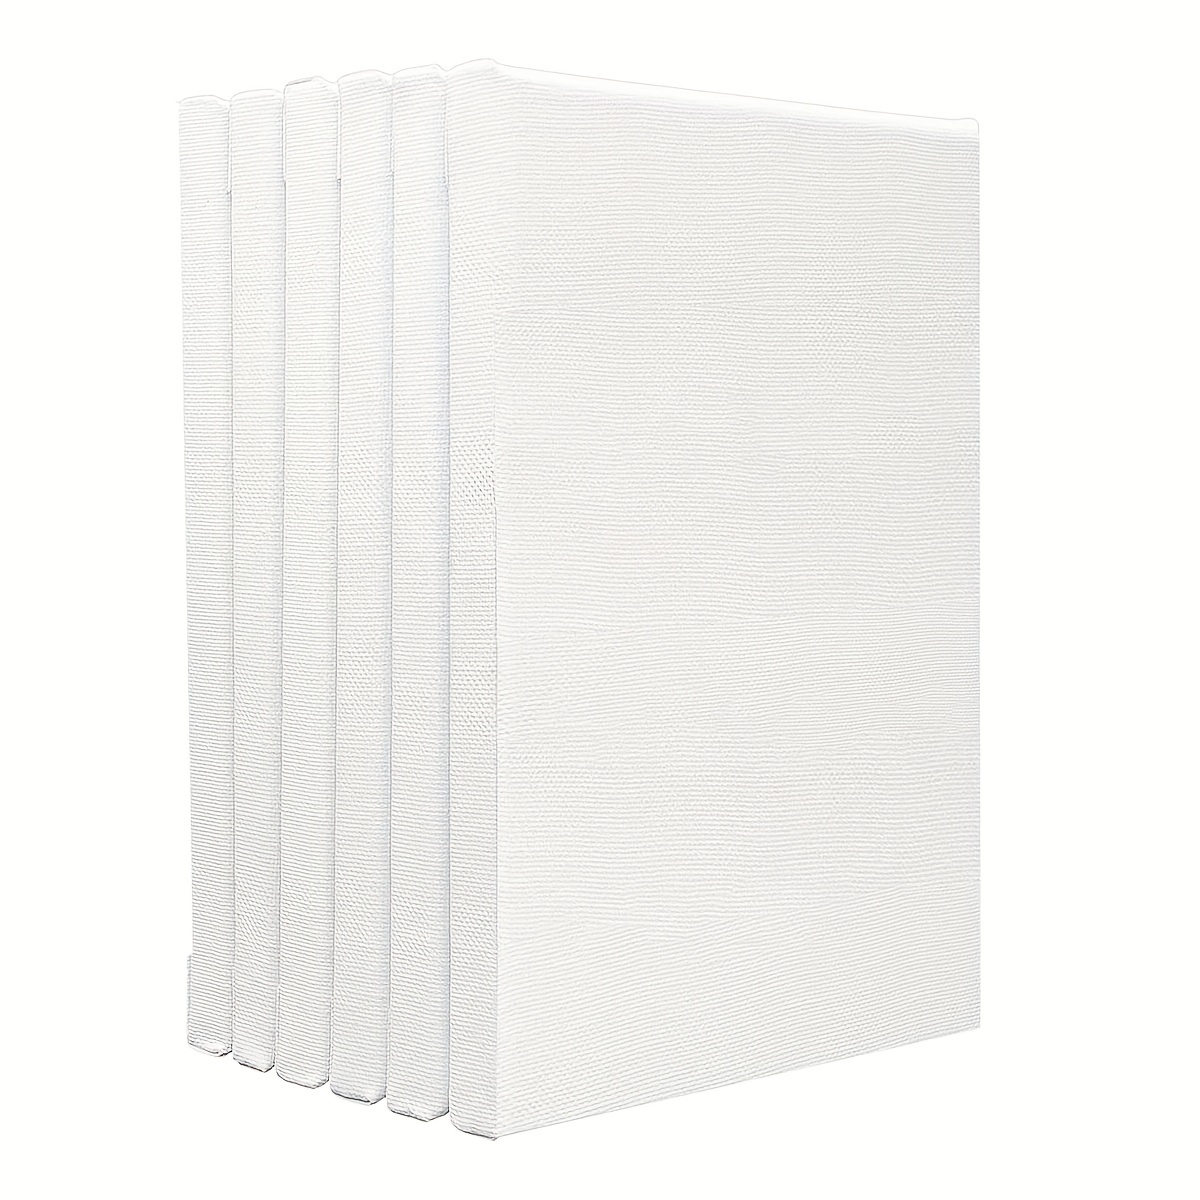 Stretched Canvases for Painting 5 Pack 16x20 Inch, 100% Cotton 12.3 oz  Triple Primed Painting Canvas, 3/4 Profile Acid-Free Large Paint Canvas  Blank